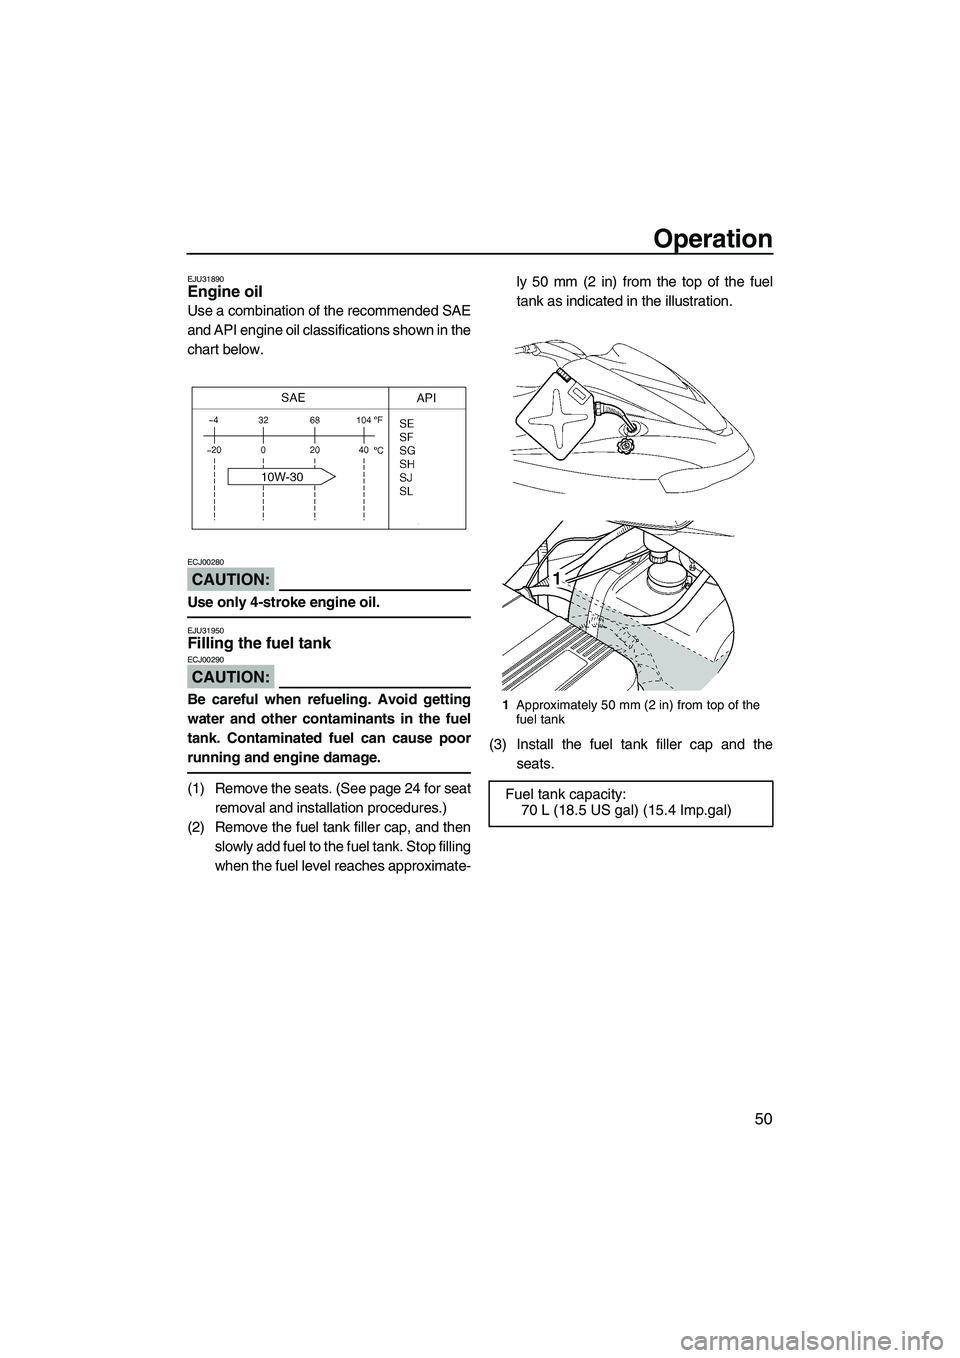 YAMAHA FX HO 2007  Owners Manual Operation
50
EJU31890Engine oil 
Use a combination of the recommended SAE
and API engine oil classifications shown in the
chart below.
CAUTION:
ECJ00280
Use only 4-stroke engine oil.
EJU31950Filling t